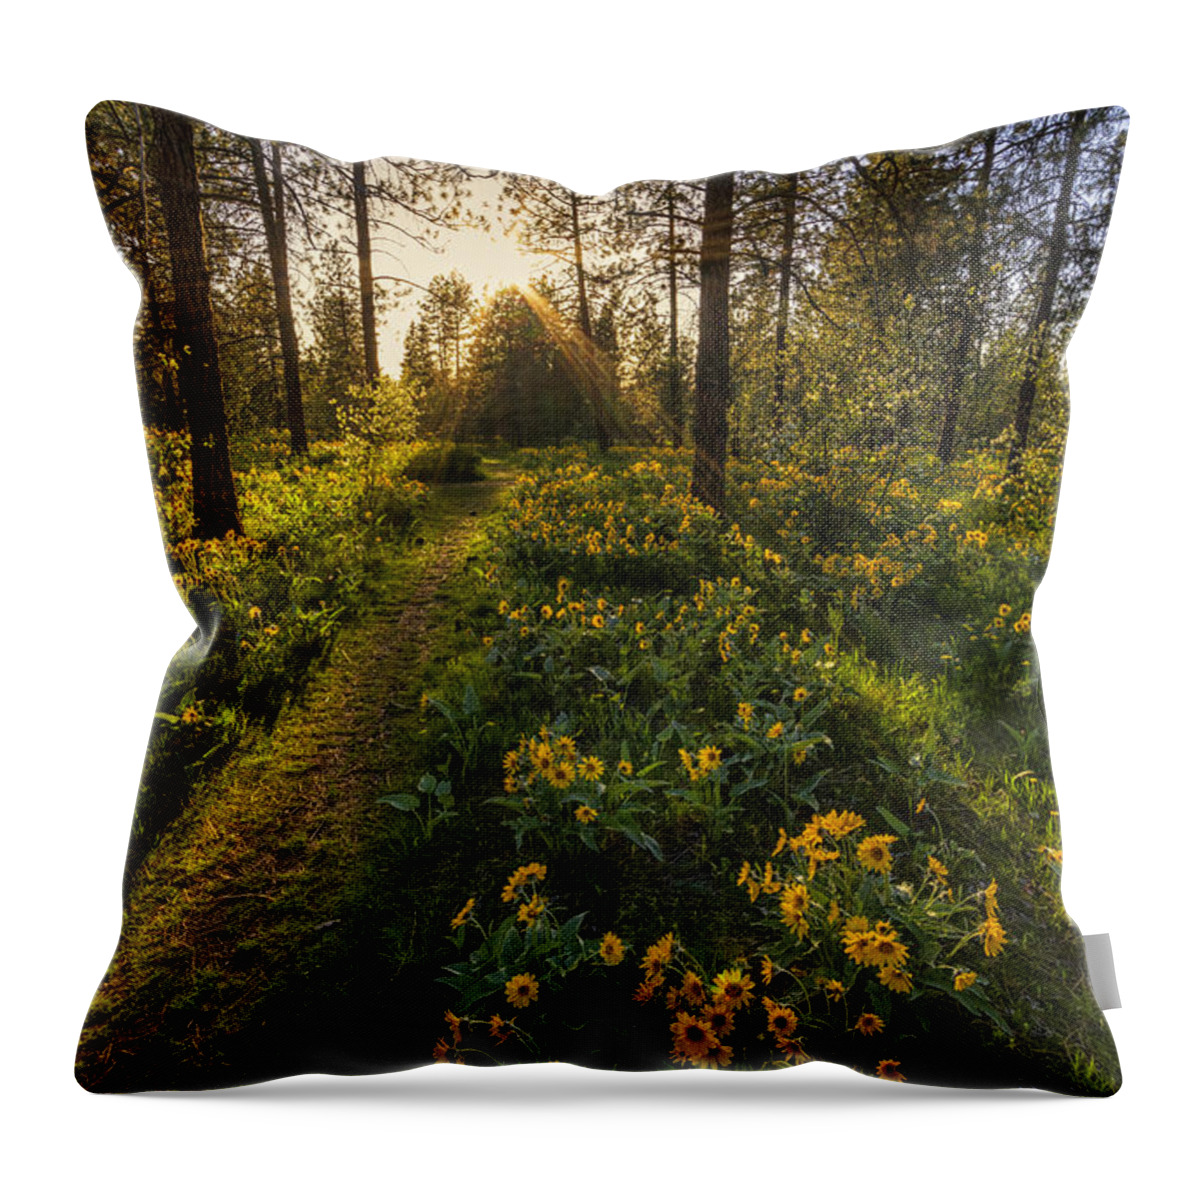 Hamblen Park Throw Pillow featuring the photograph Path to the Golden Light by Mark Kiver